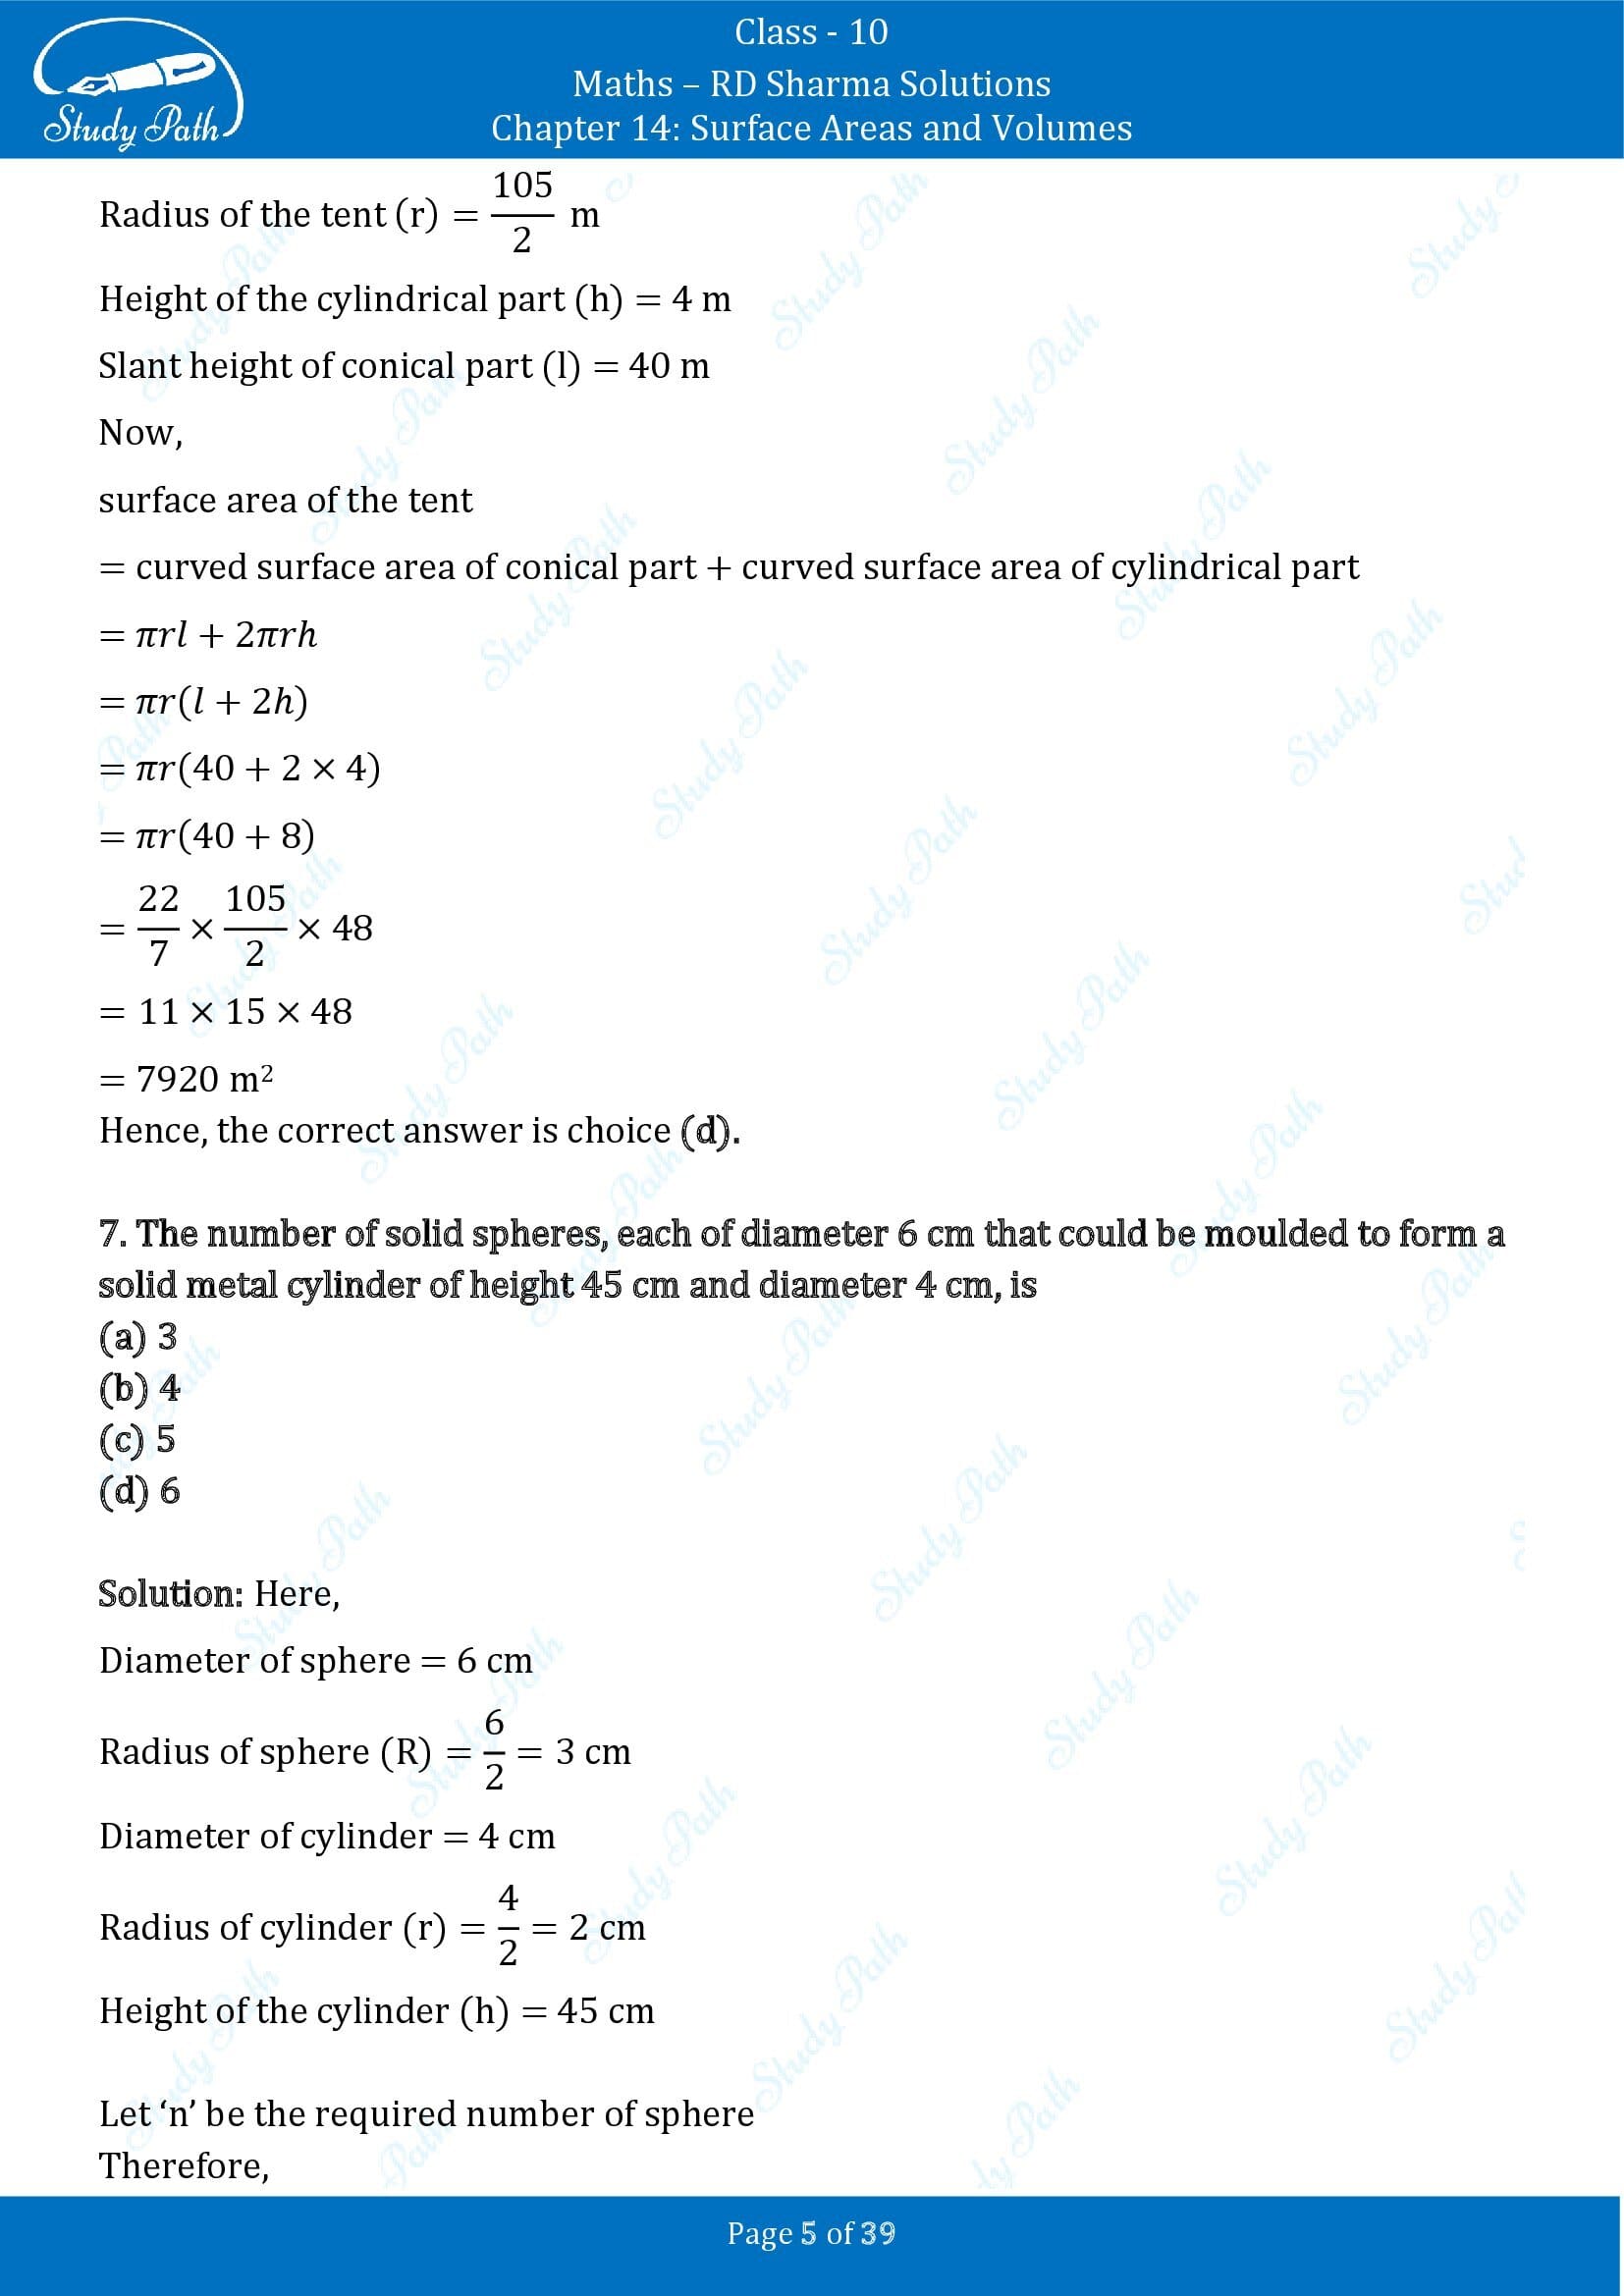 RD Sharma Solutions Class 10 Chapter 14 Surface Areas and Volumes Multiple Choice Question MCQs 00005